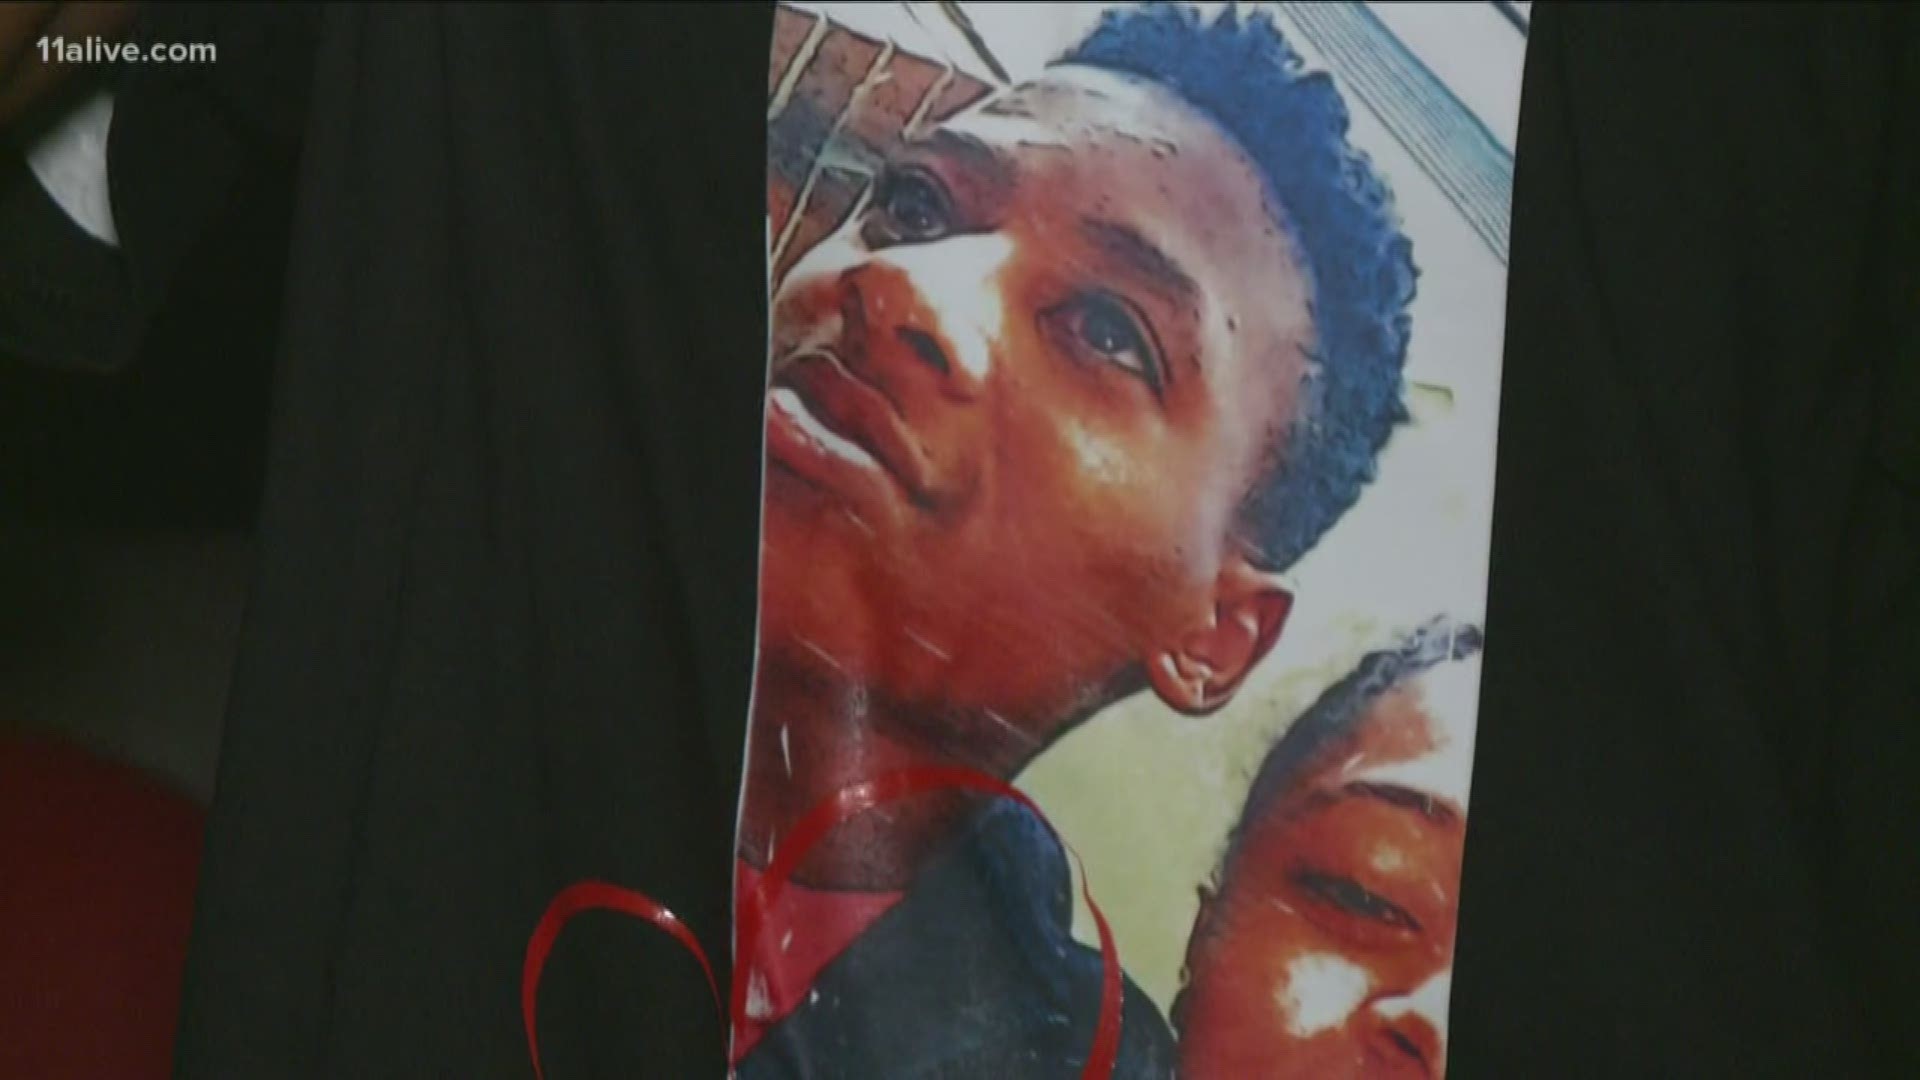 Police said Jermaine Wallace, known as J.J. by family and friends, was hit by a car while trying to cross Donald Lee Hollowell Parkway to get to school Friday morning. He died Saturday at the hospital.